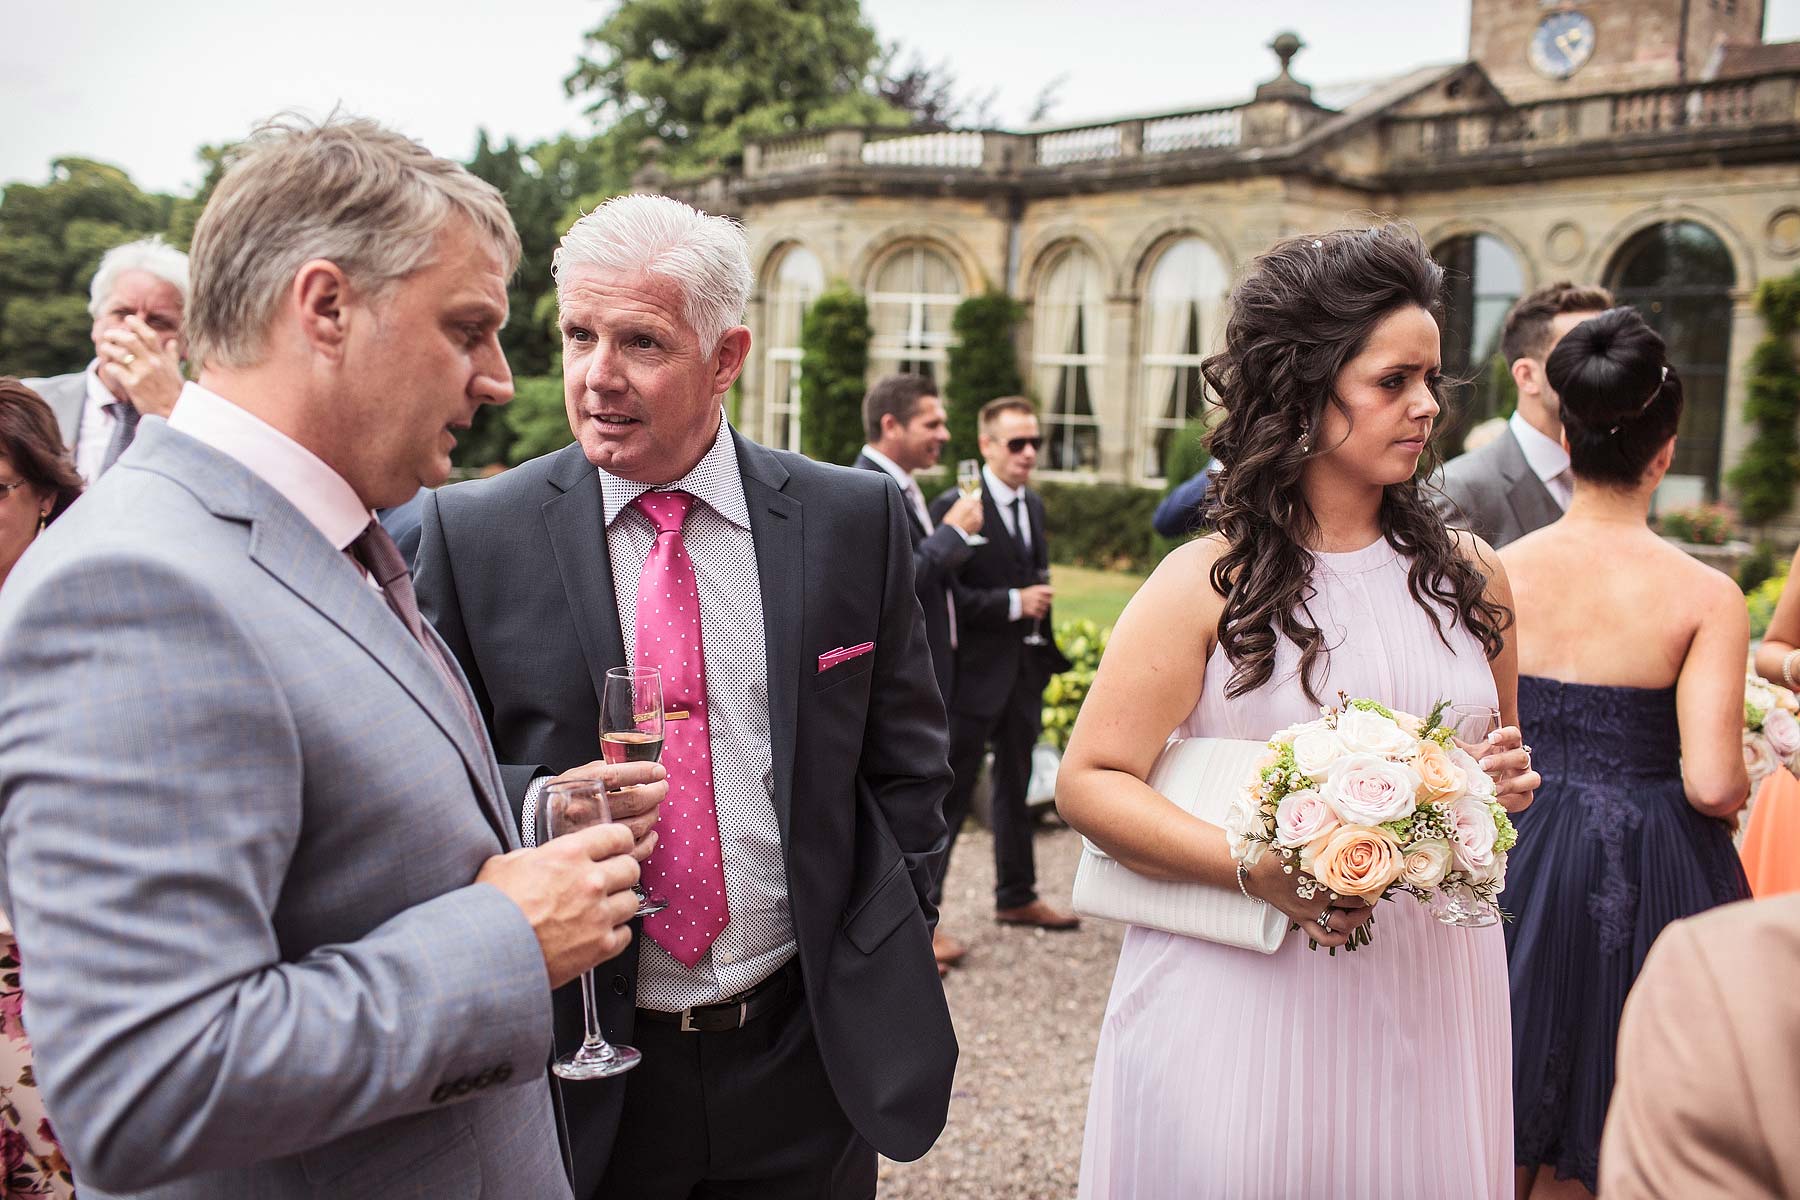 Candid photographs of guests enjoying drinks reception on terrace at Weston Park in Staffordshire by Documentary Wedding Photographer Stuart James